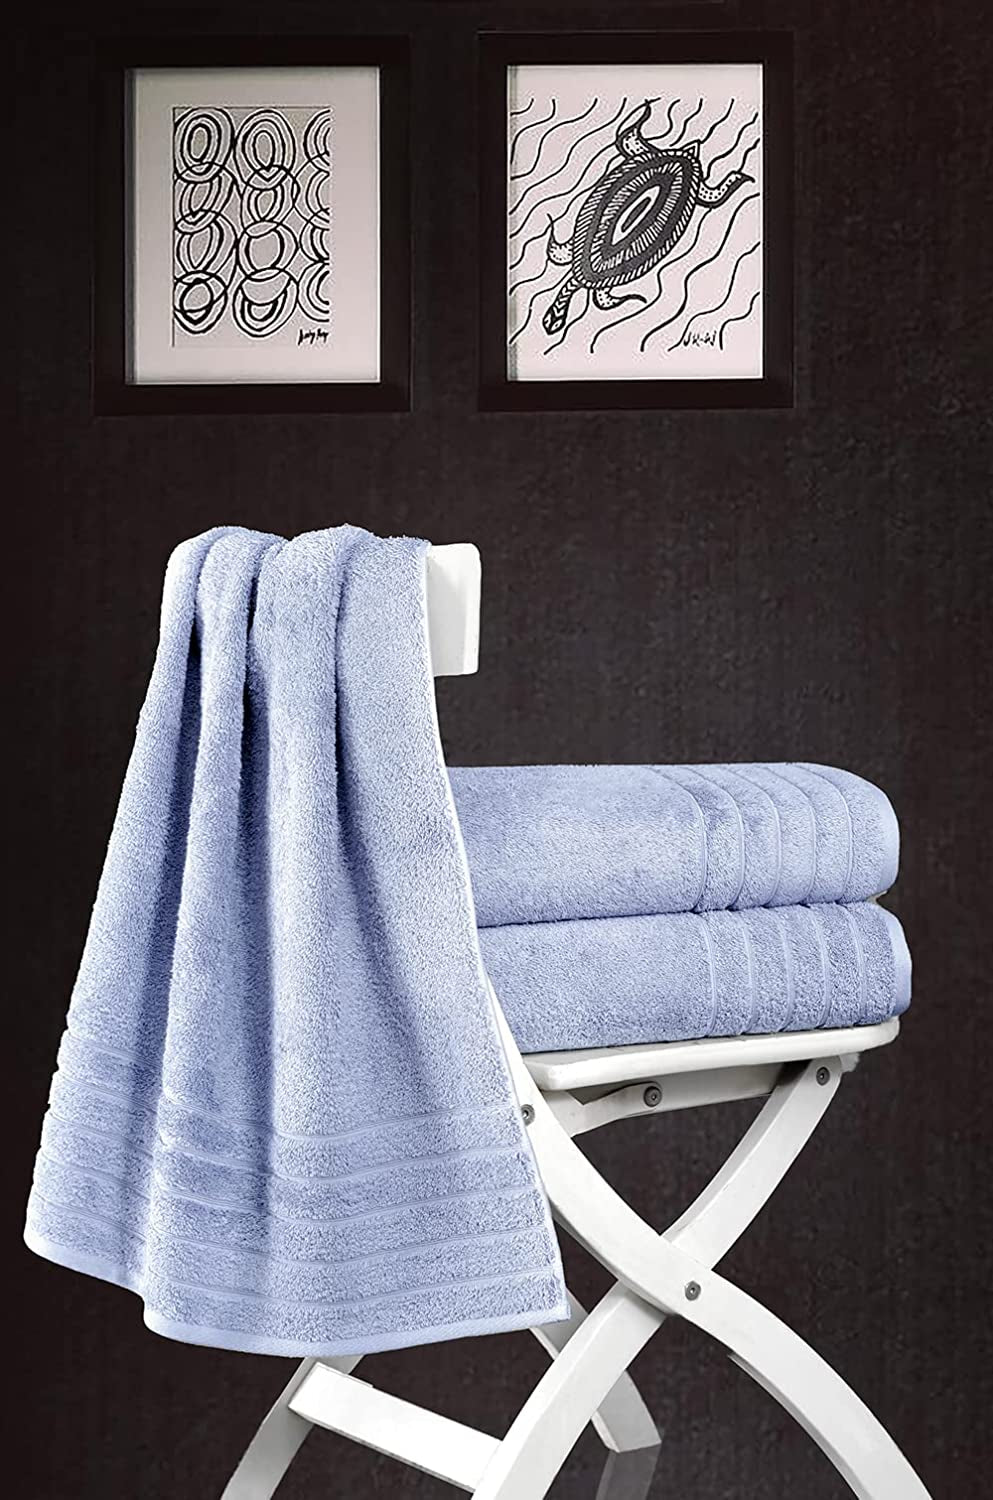 Barmum - Turkish Bath Towels Set of 3 - Premium Quality Made with 100% Turkish Cotton, Spa & Hotel Towels, Absorbent & Comfy Bath Towels | 30"X56" (Blue)